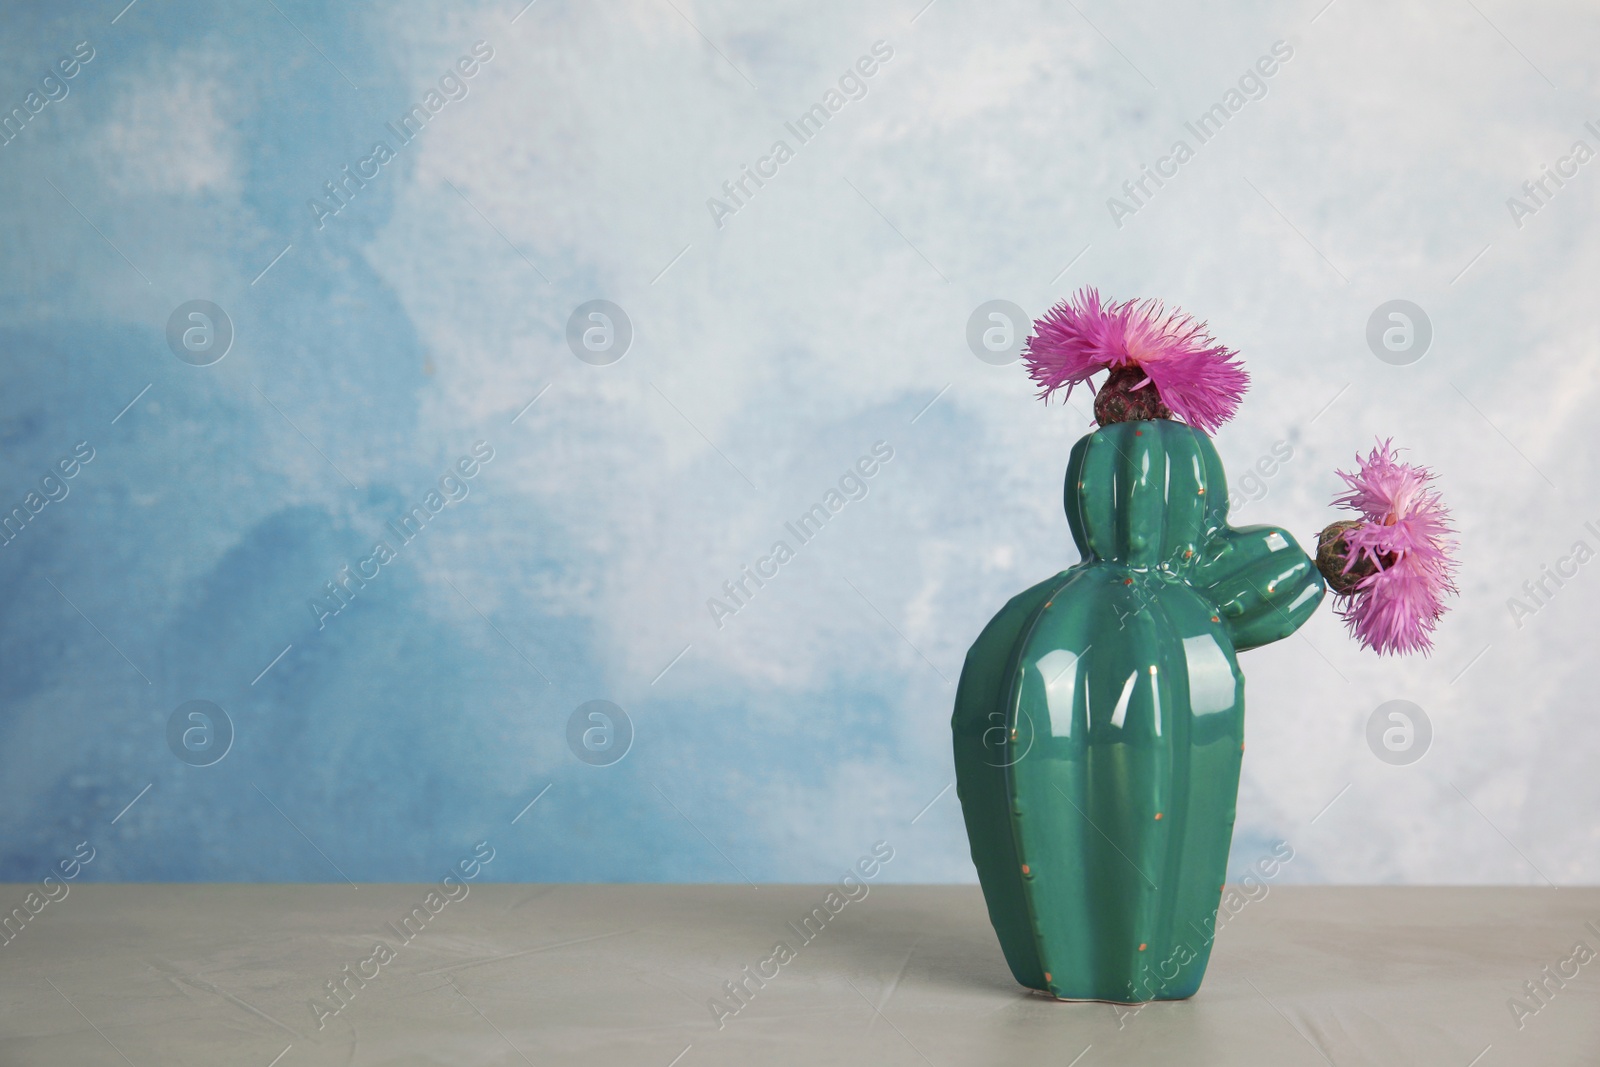 Photo of Trendy cactus shaped ceramic vase with flowers on table